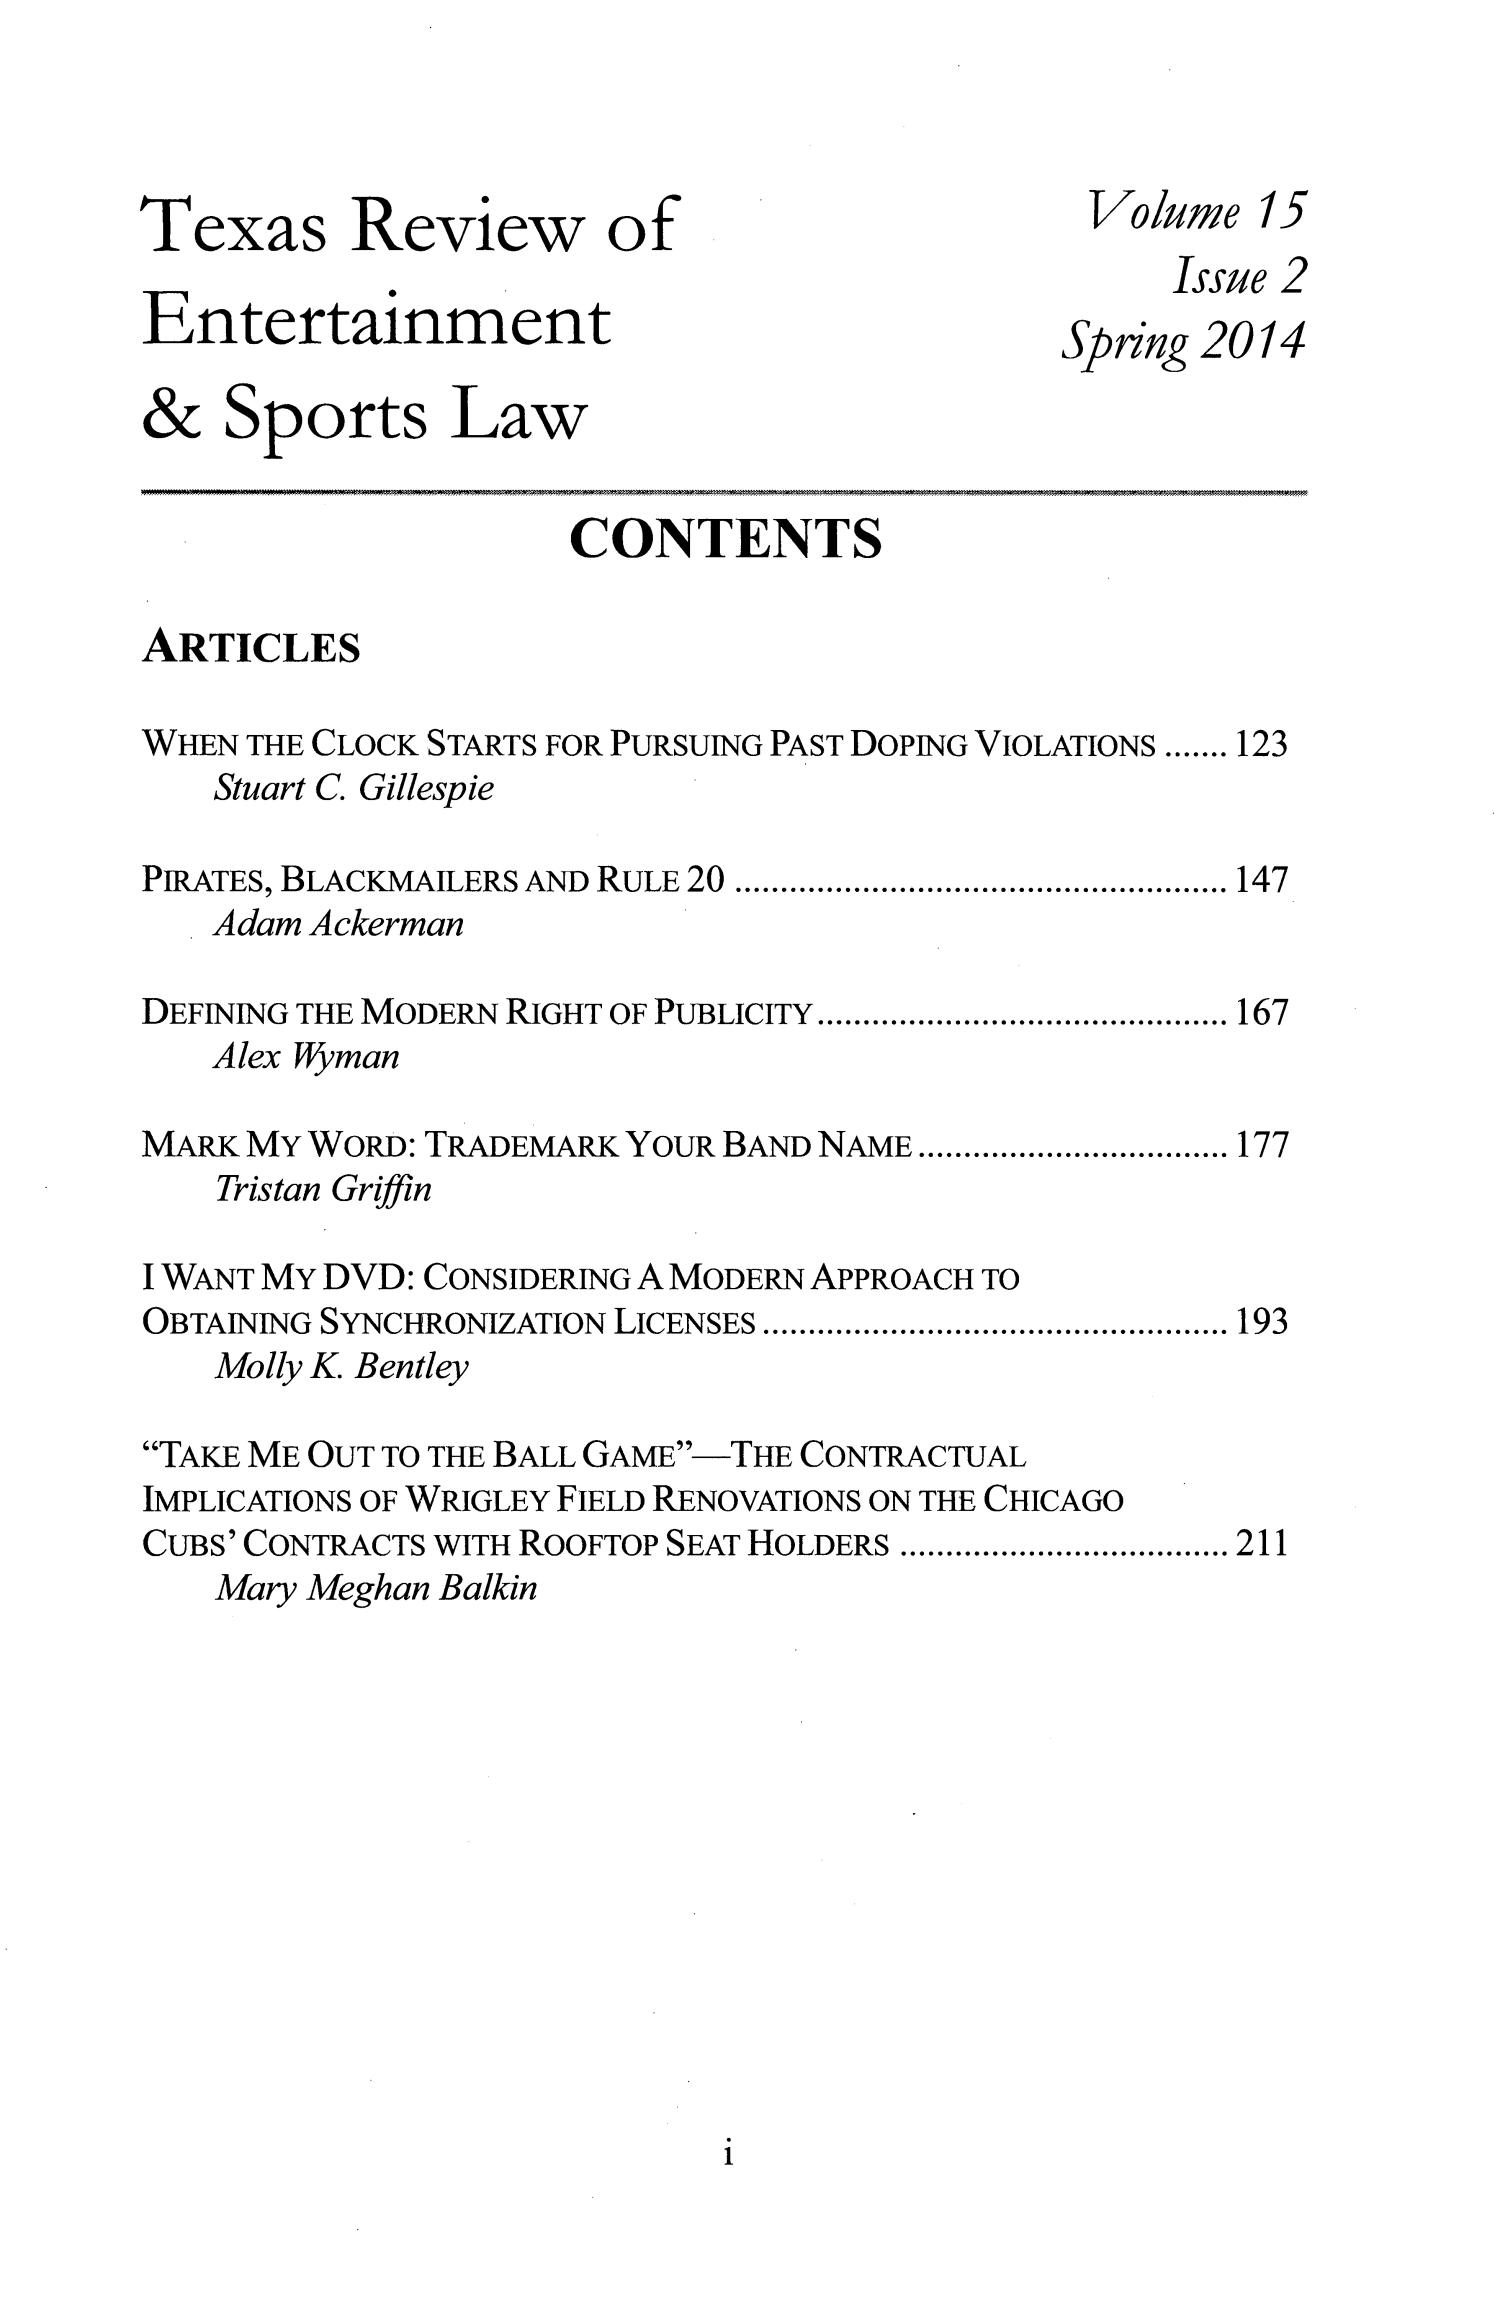 Texas Review of Entertainment & Sports Law, Volume 15, Number 2, Spring 2014
                                                
                                                    I
                                                